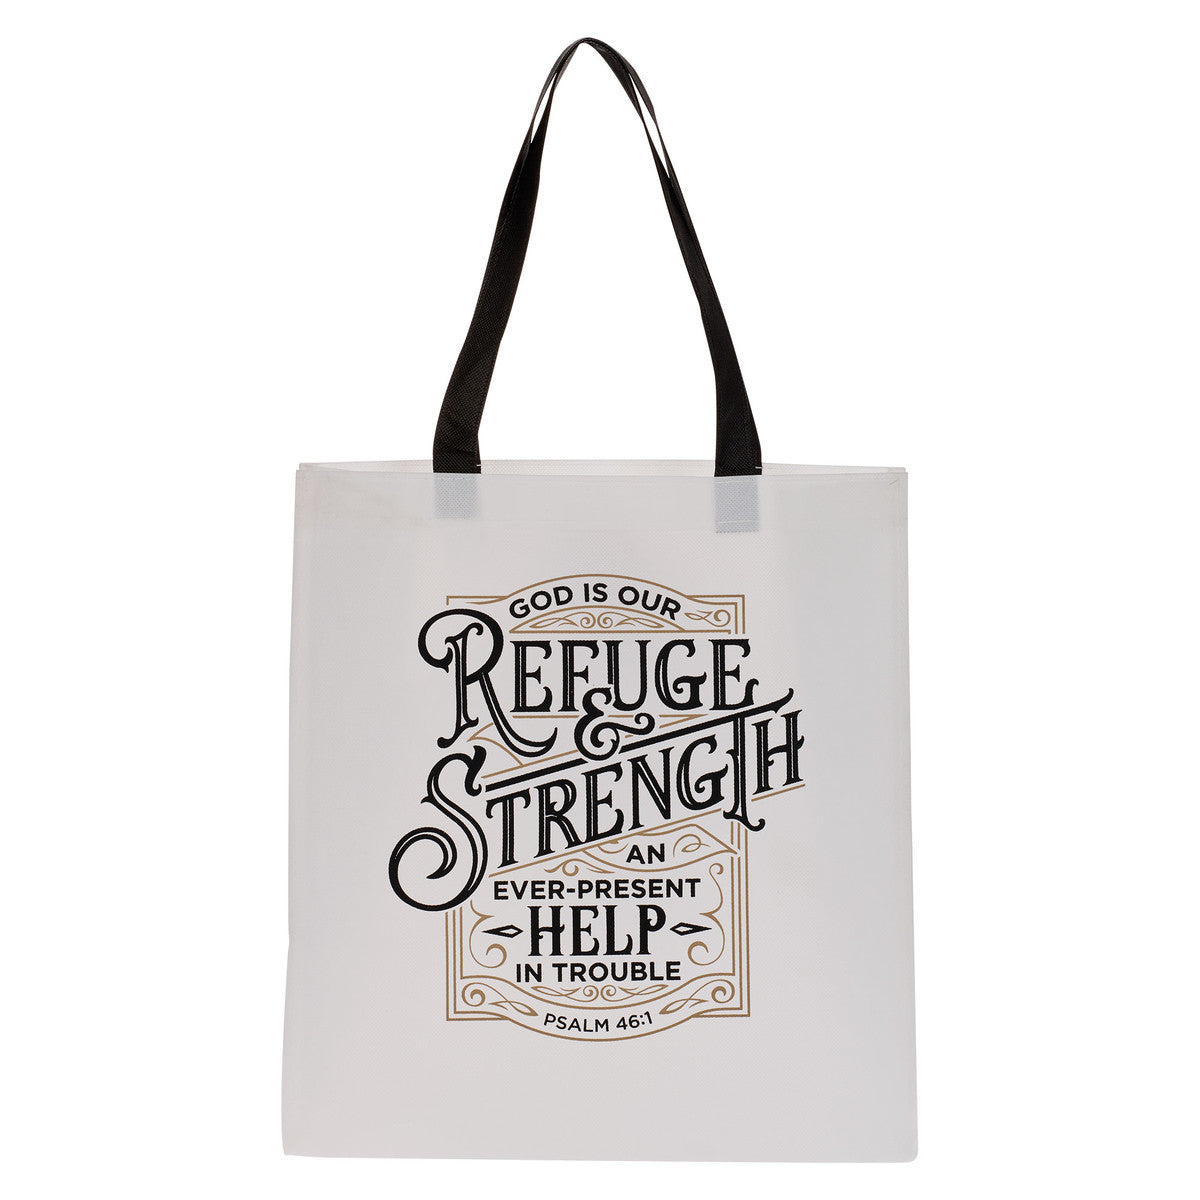 Refuge and Strength Black and White Shopping Tote Bag - Psalm 46:1